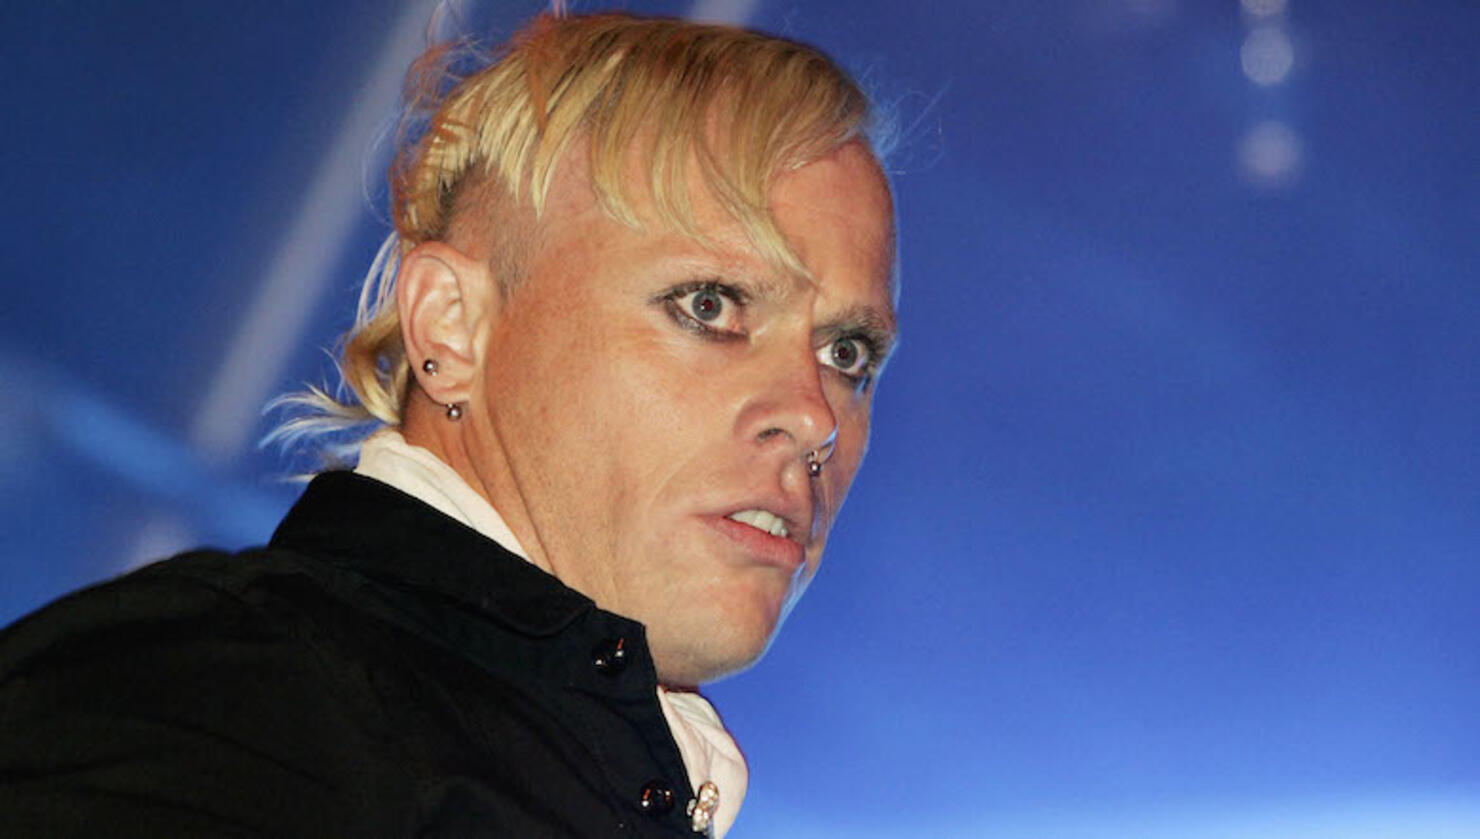 The Prodigy Play The Grolsch Summer Set